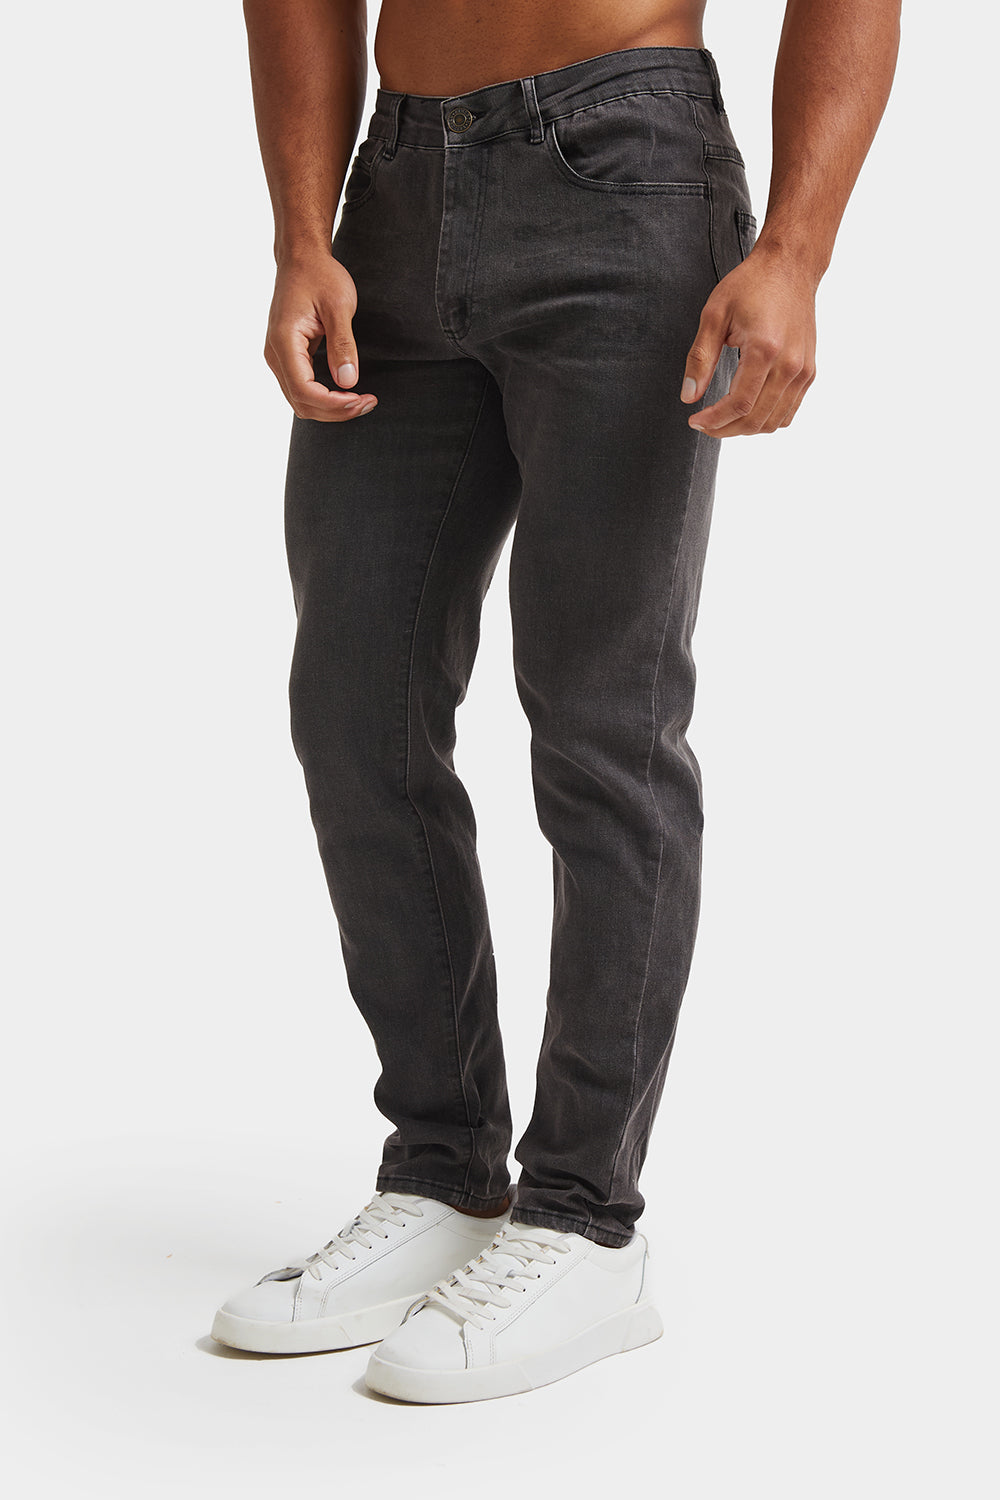 Athletic Fit Jeans ATHLETE USA - - Dark in TAILORED Grey